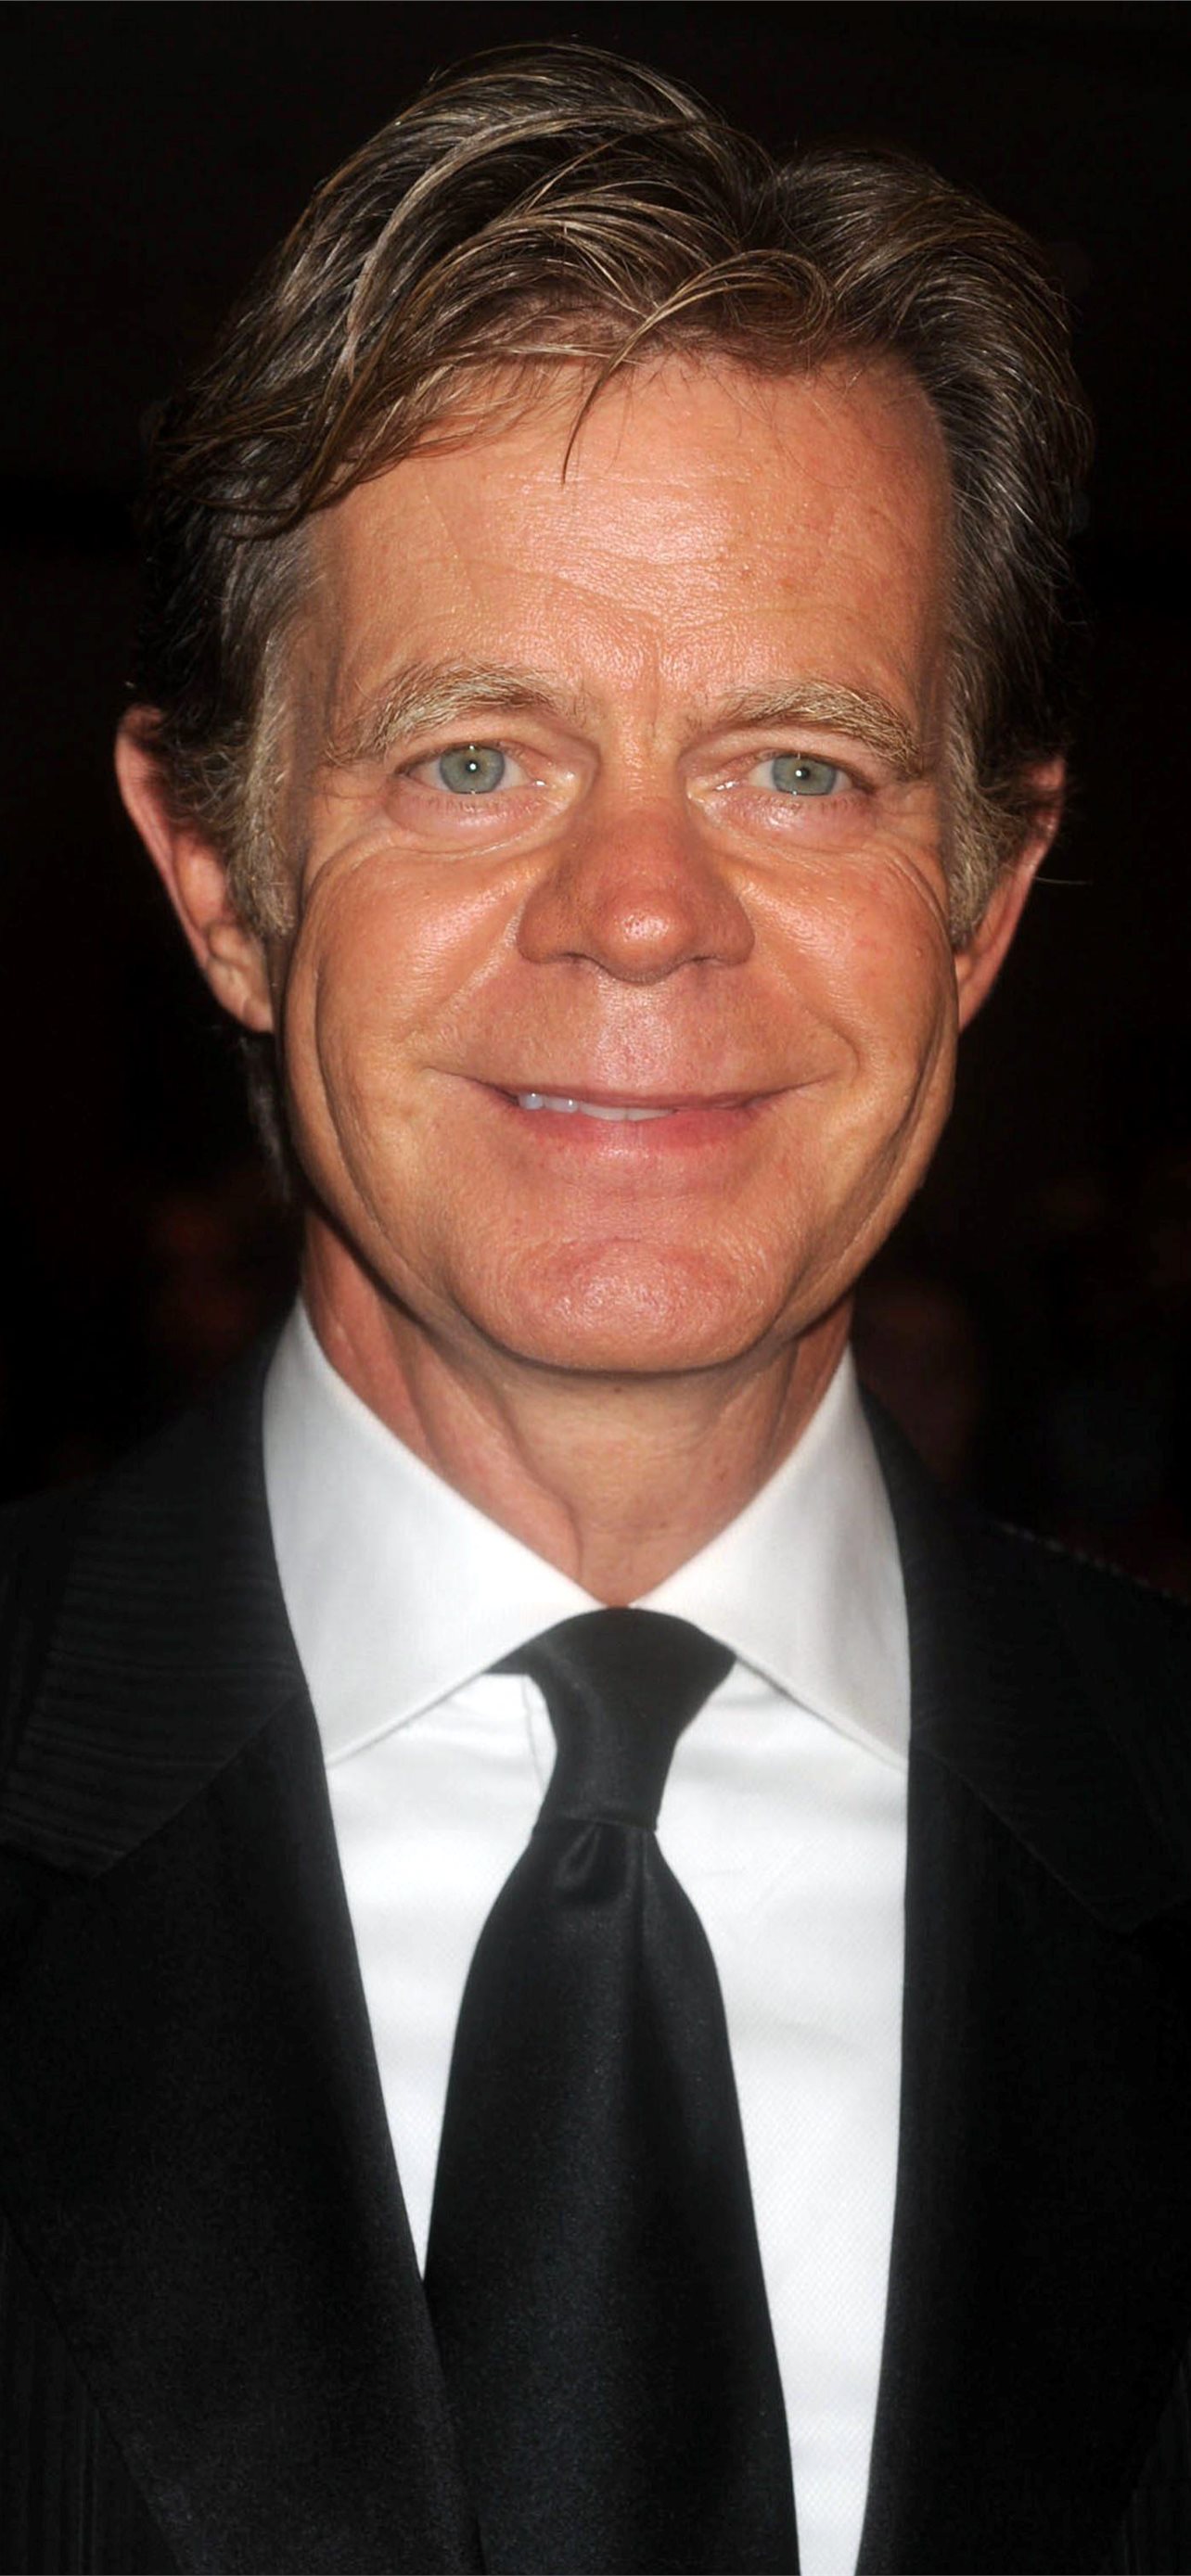 Best william h macy iphone hd wallpapers